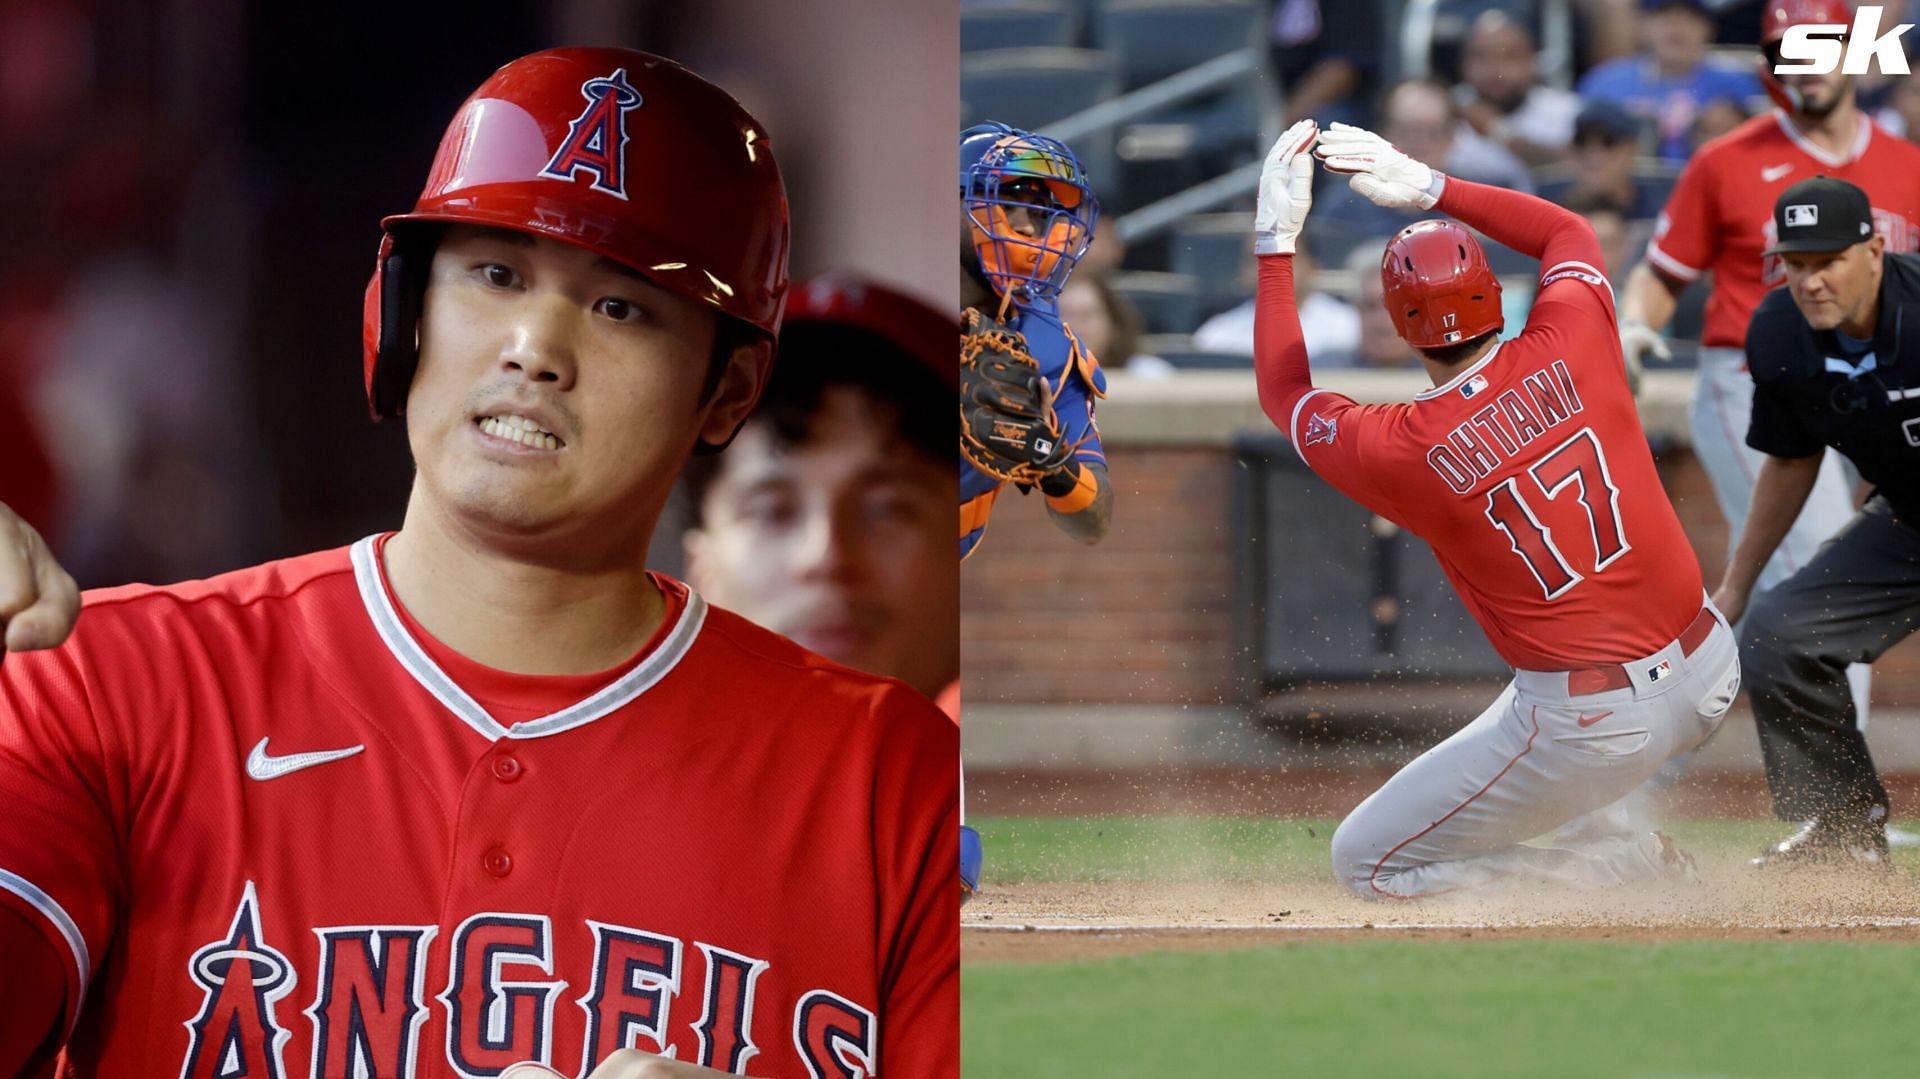 Shohei Ohtani dazzles for the Angels despite UCL injury